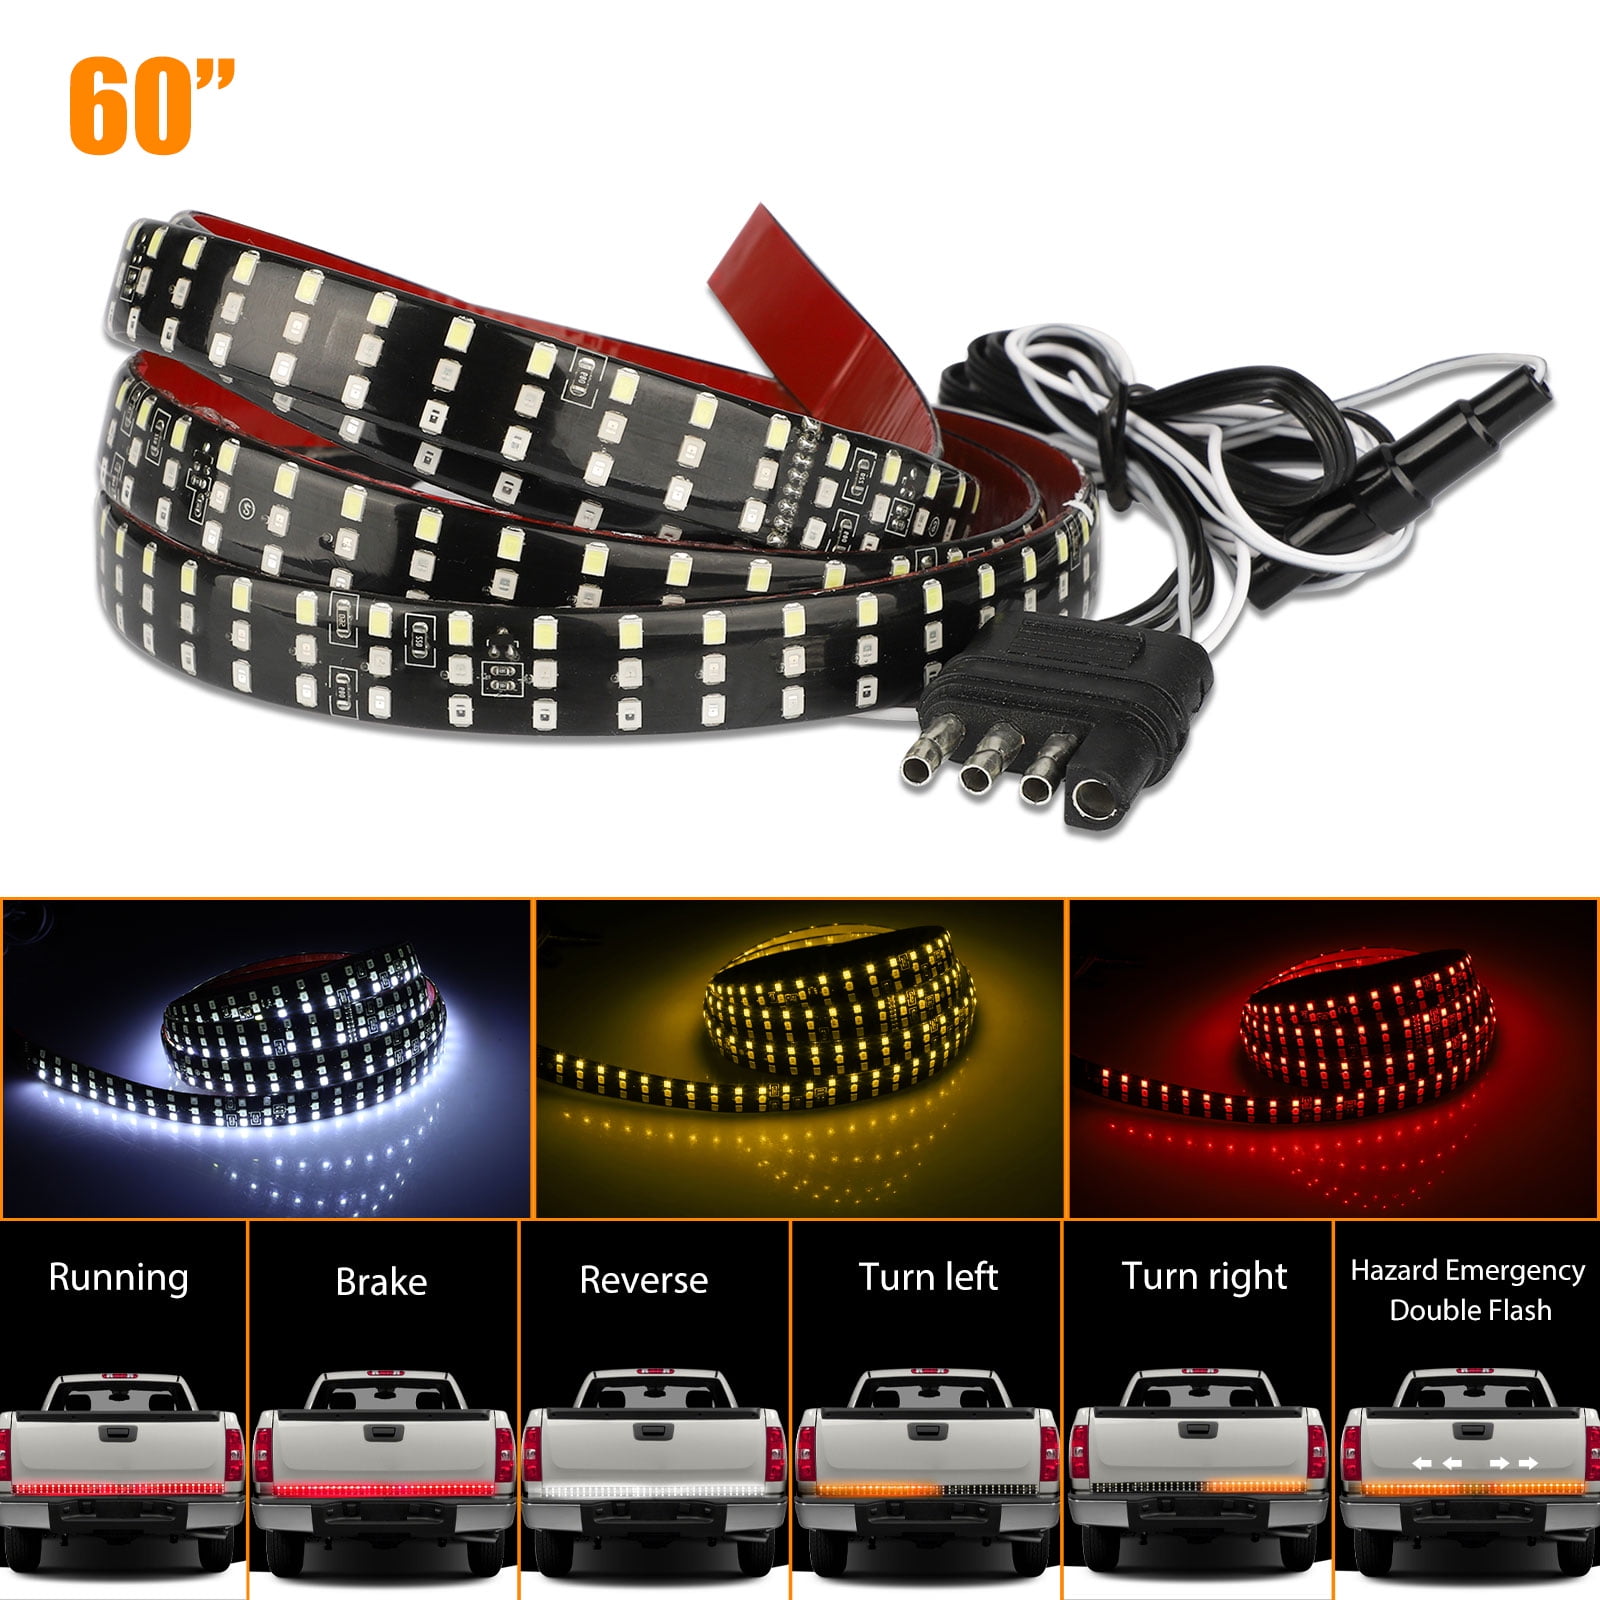 Red Brake/Running 60inch Yellow Turn Signals White Reverse Lights for Pickup Truck SUV RV OPL5 60 Triple LED Tailgate Light Strip Waterproof Plug-and-Play No Drill Install Amber Turn Signal